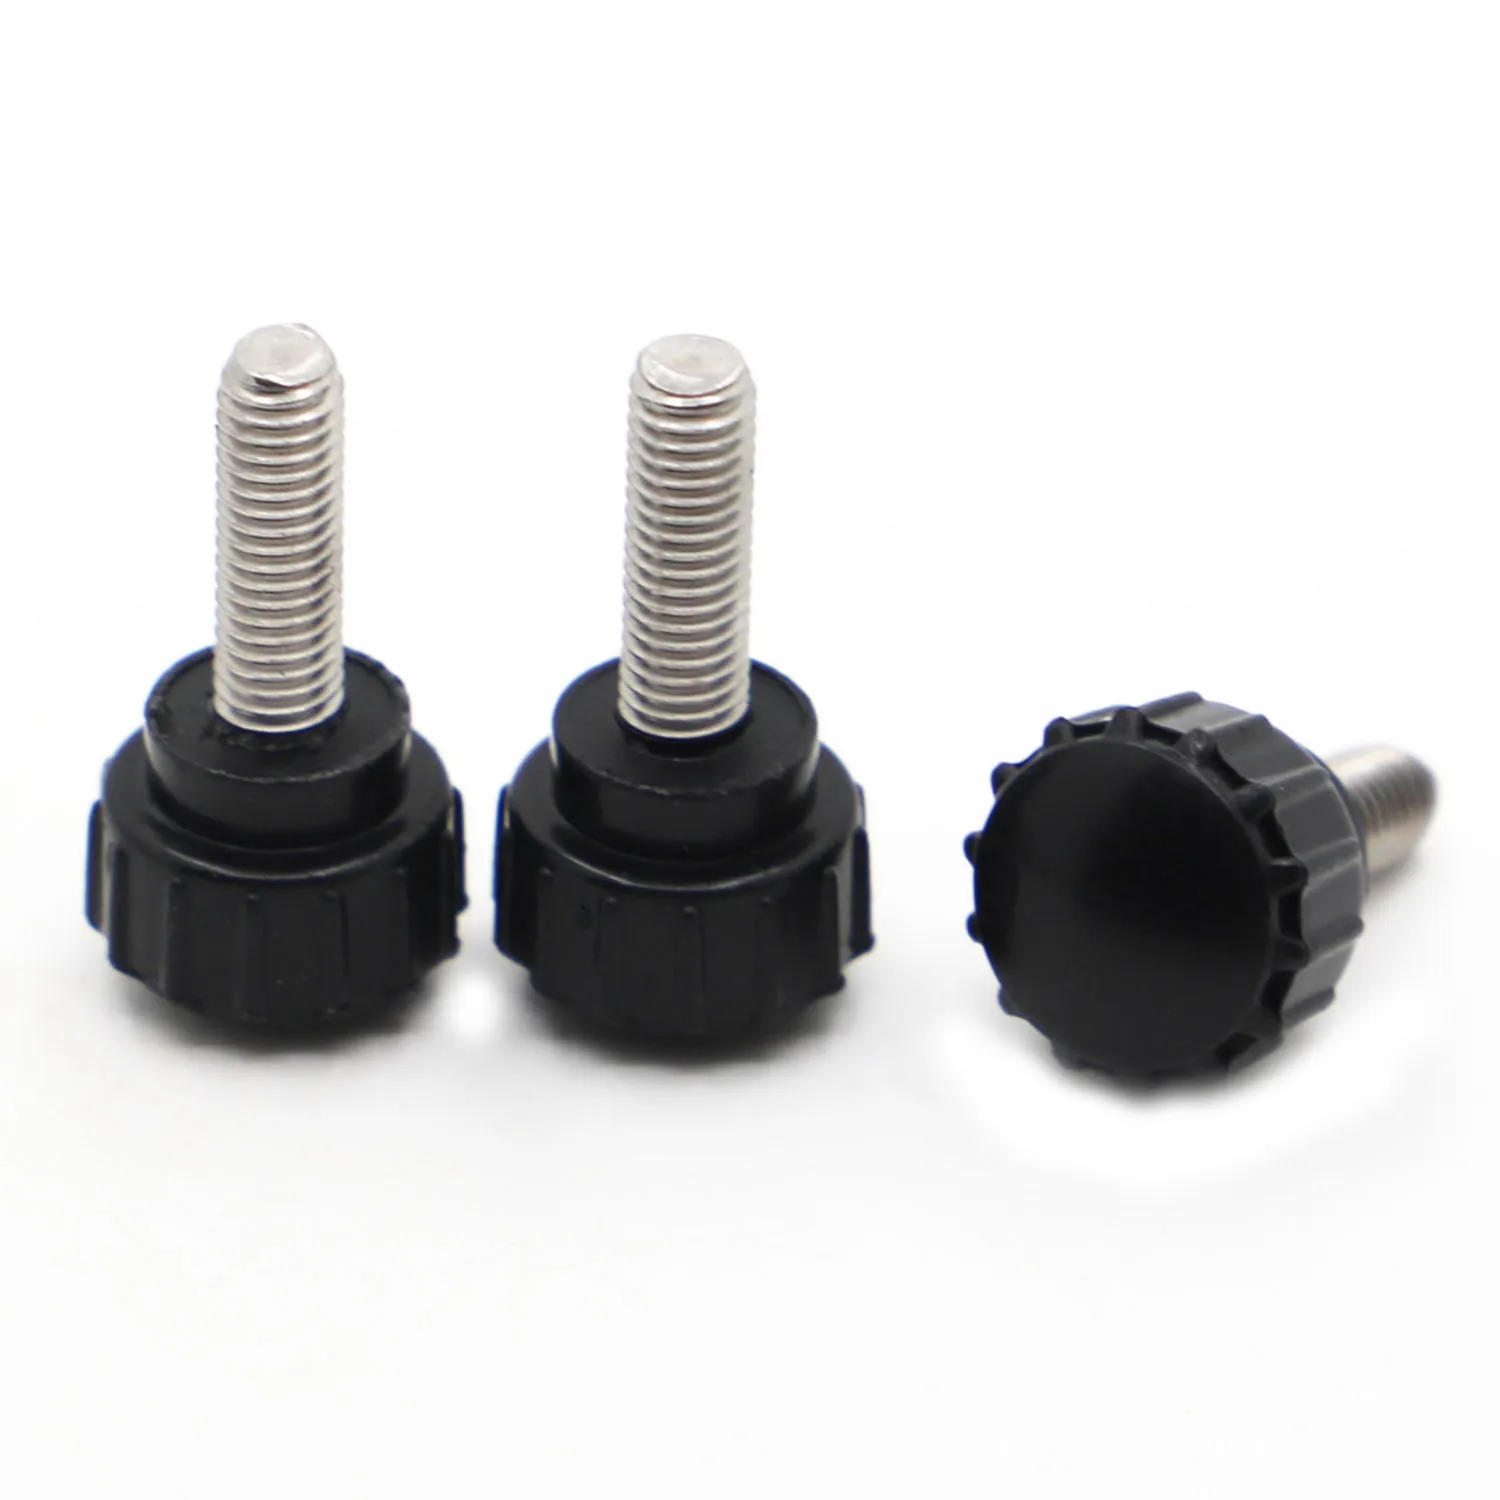 

M3 M4 M5 M6 M8 304 Stainless Steel Round Head Handle Hand Screw Round Knurled Rubber Thumb Screw Plastic Tighten Bolt Nuts Knob